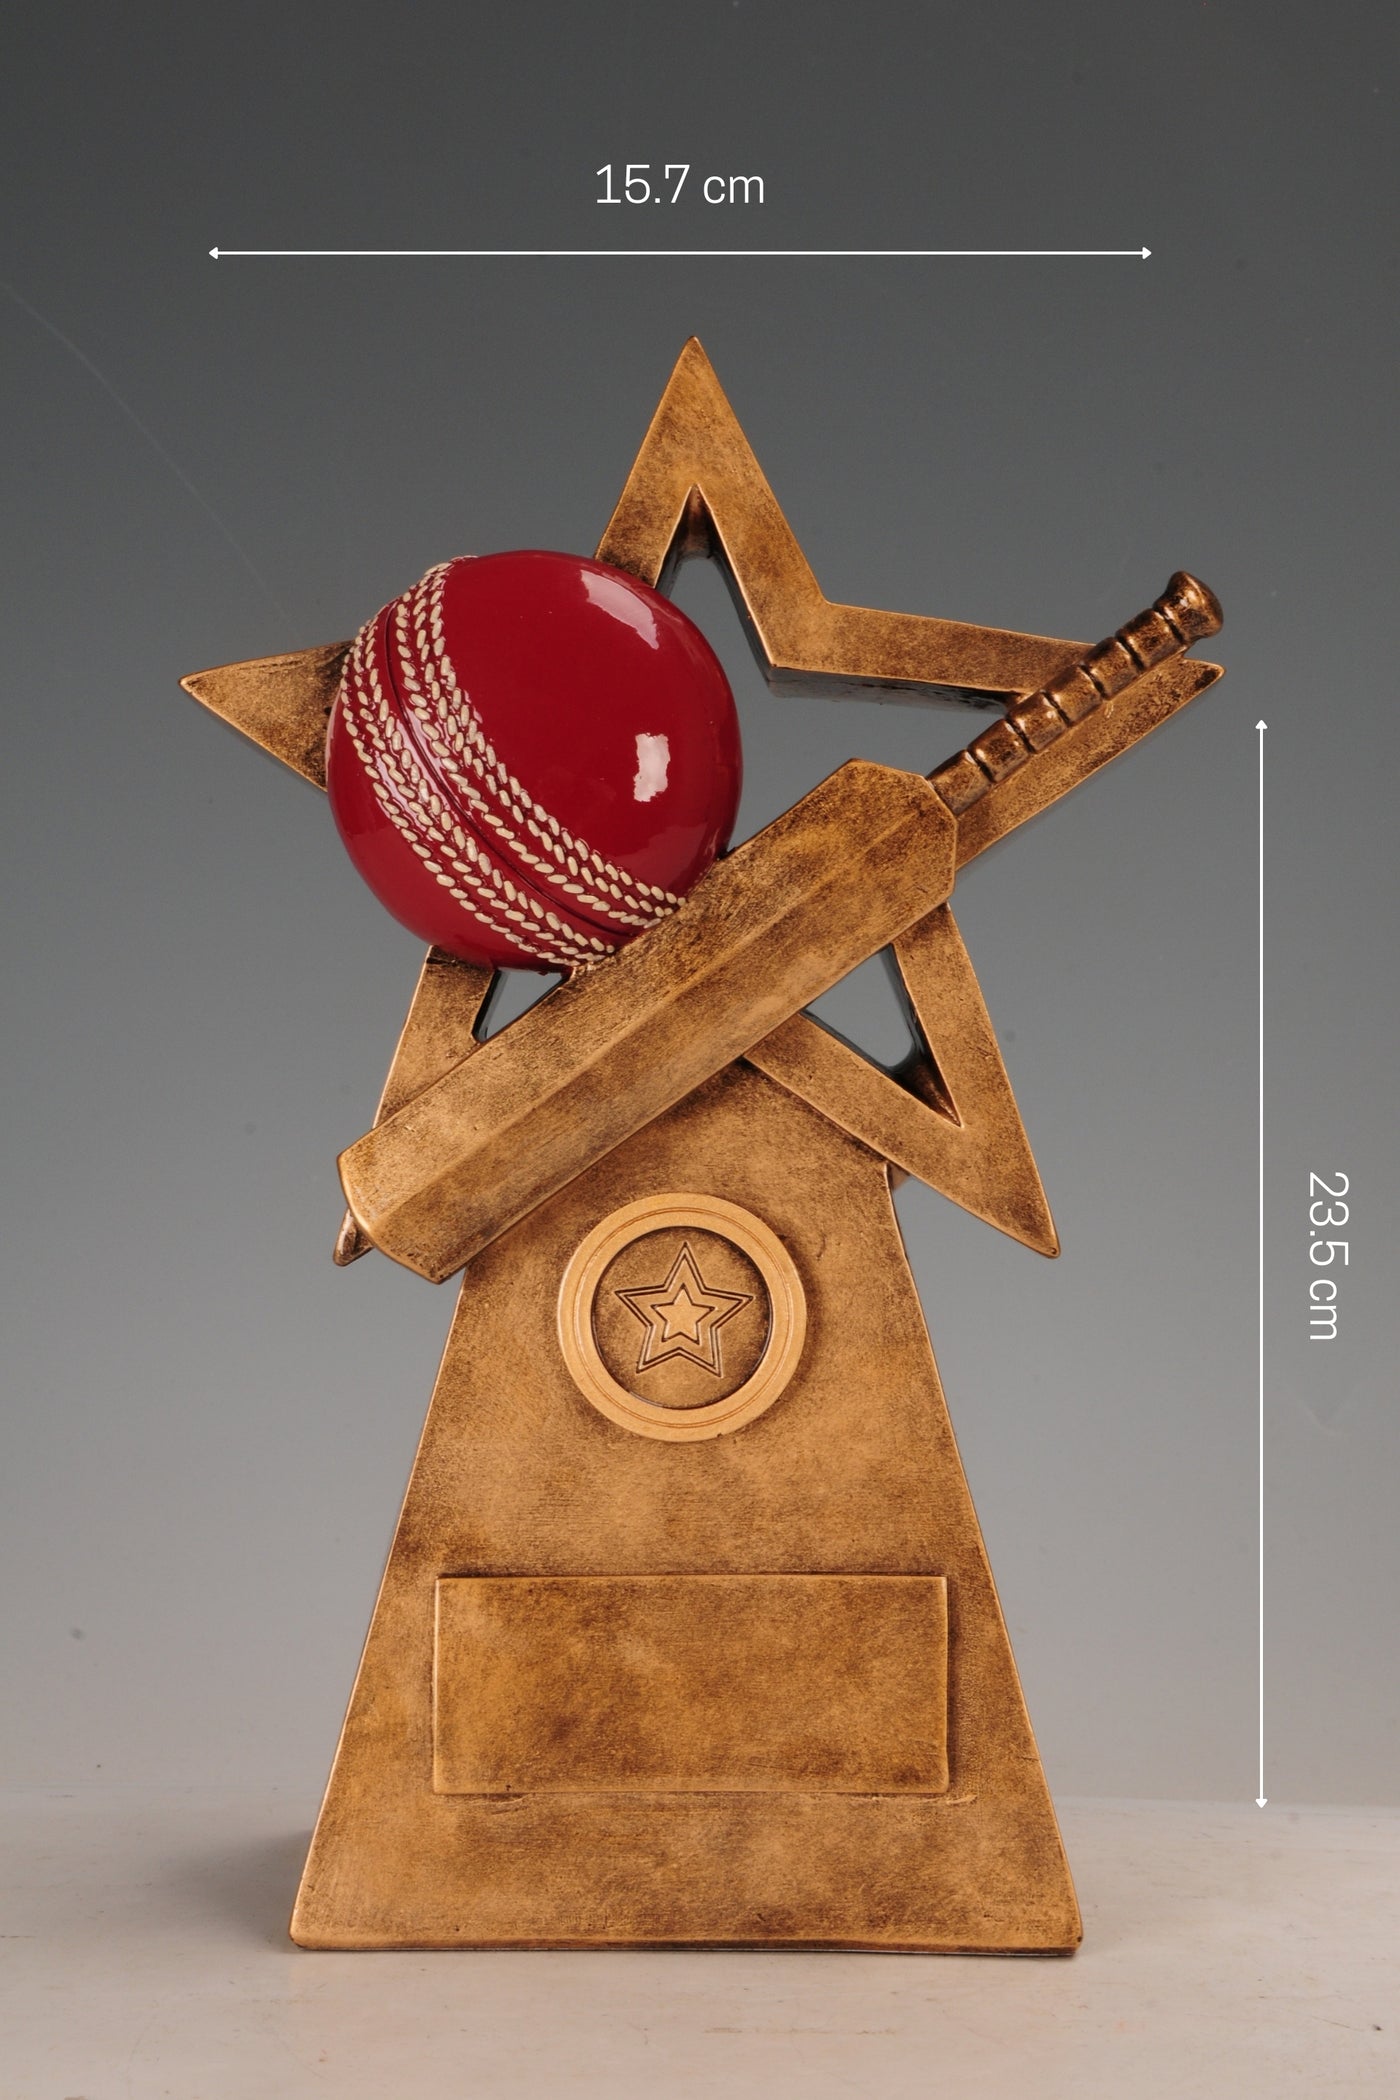 Cricket Ball/Bat on Star and Pyramid showpiece for your home or office Decor